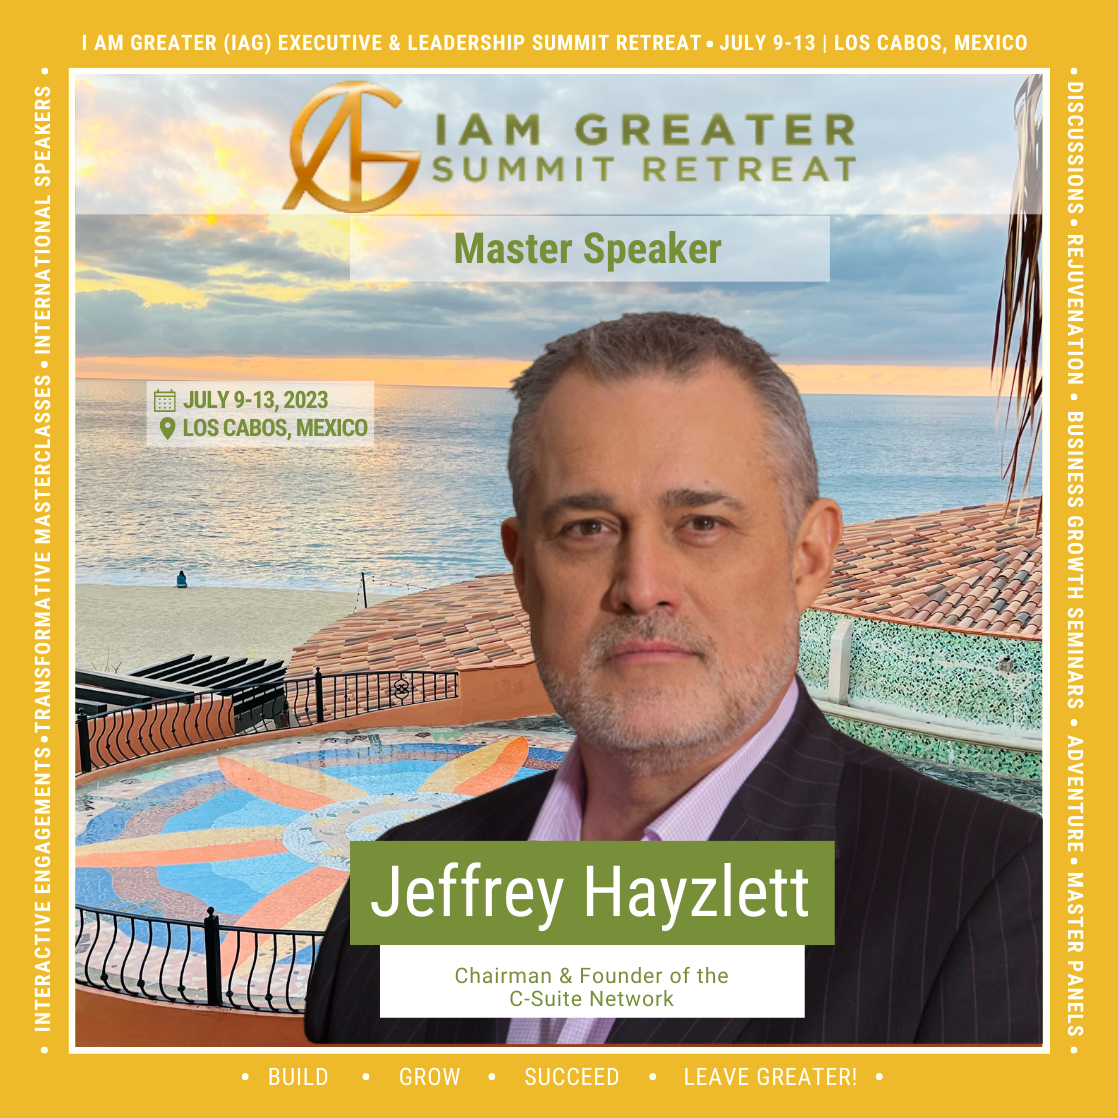 Renowned business strategist and author, Jeffrey Hayzlett, to headline the I Am Greater Summit Retreat